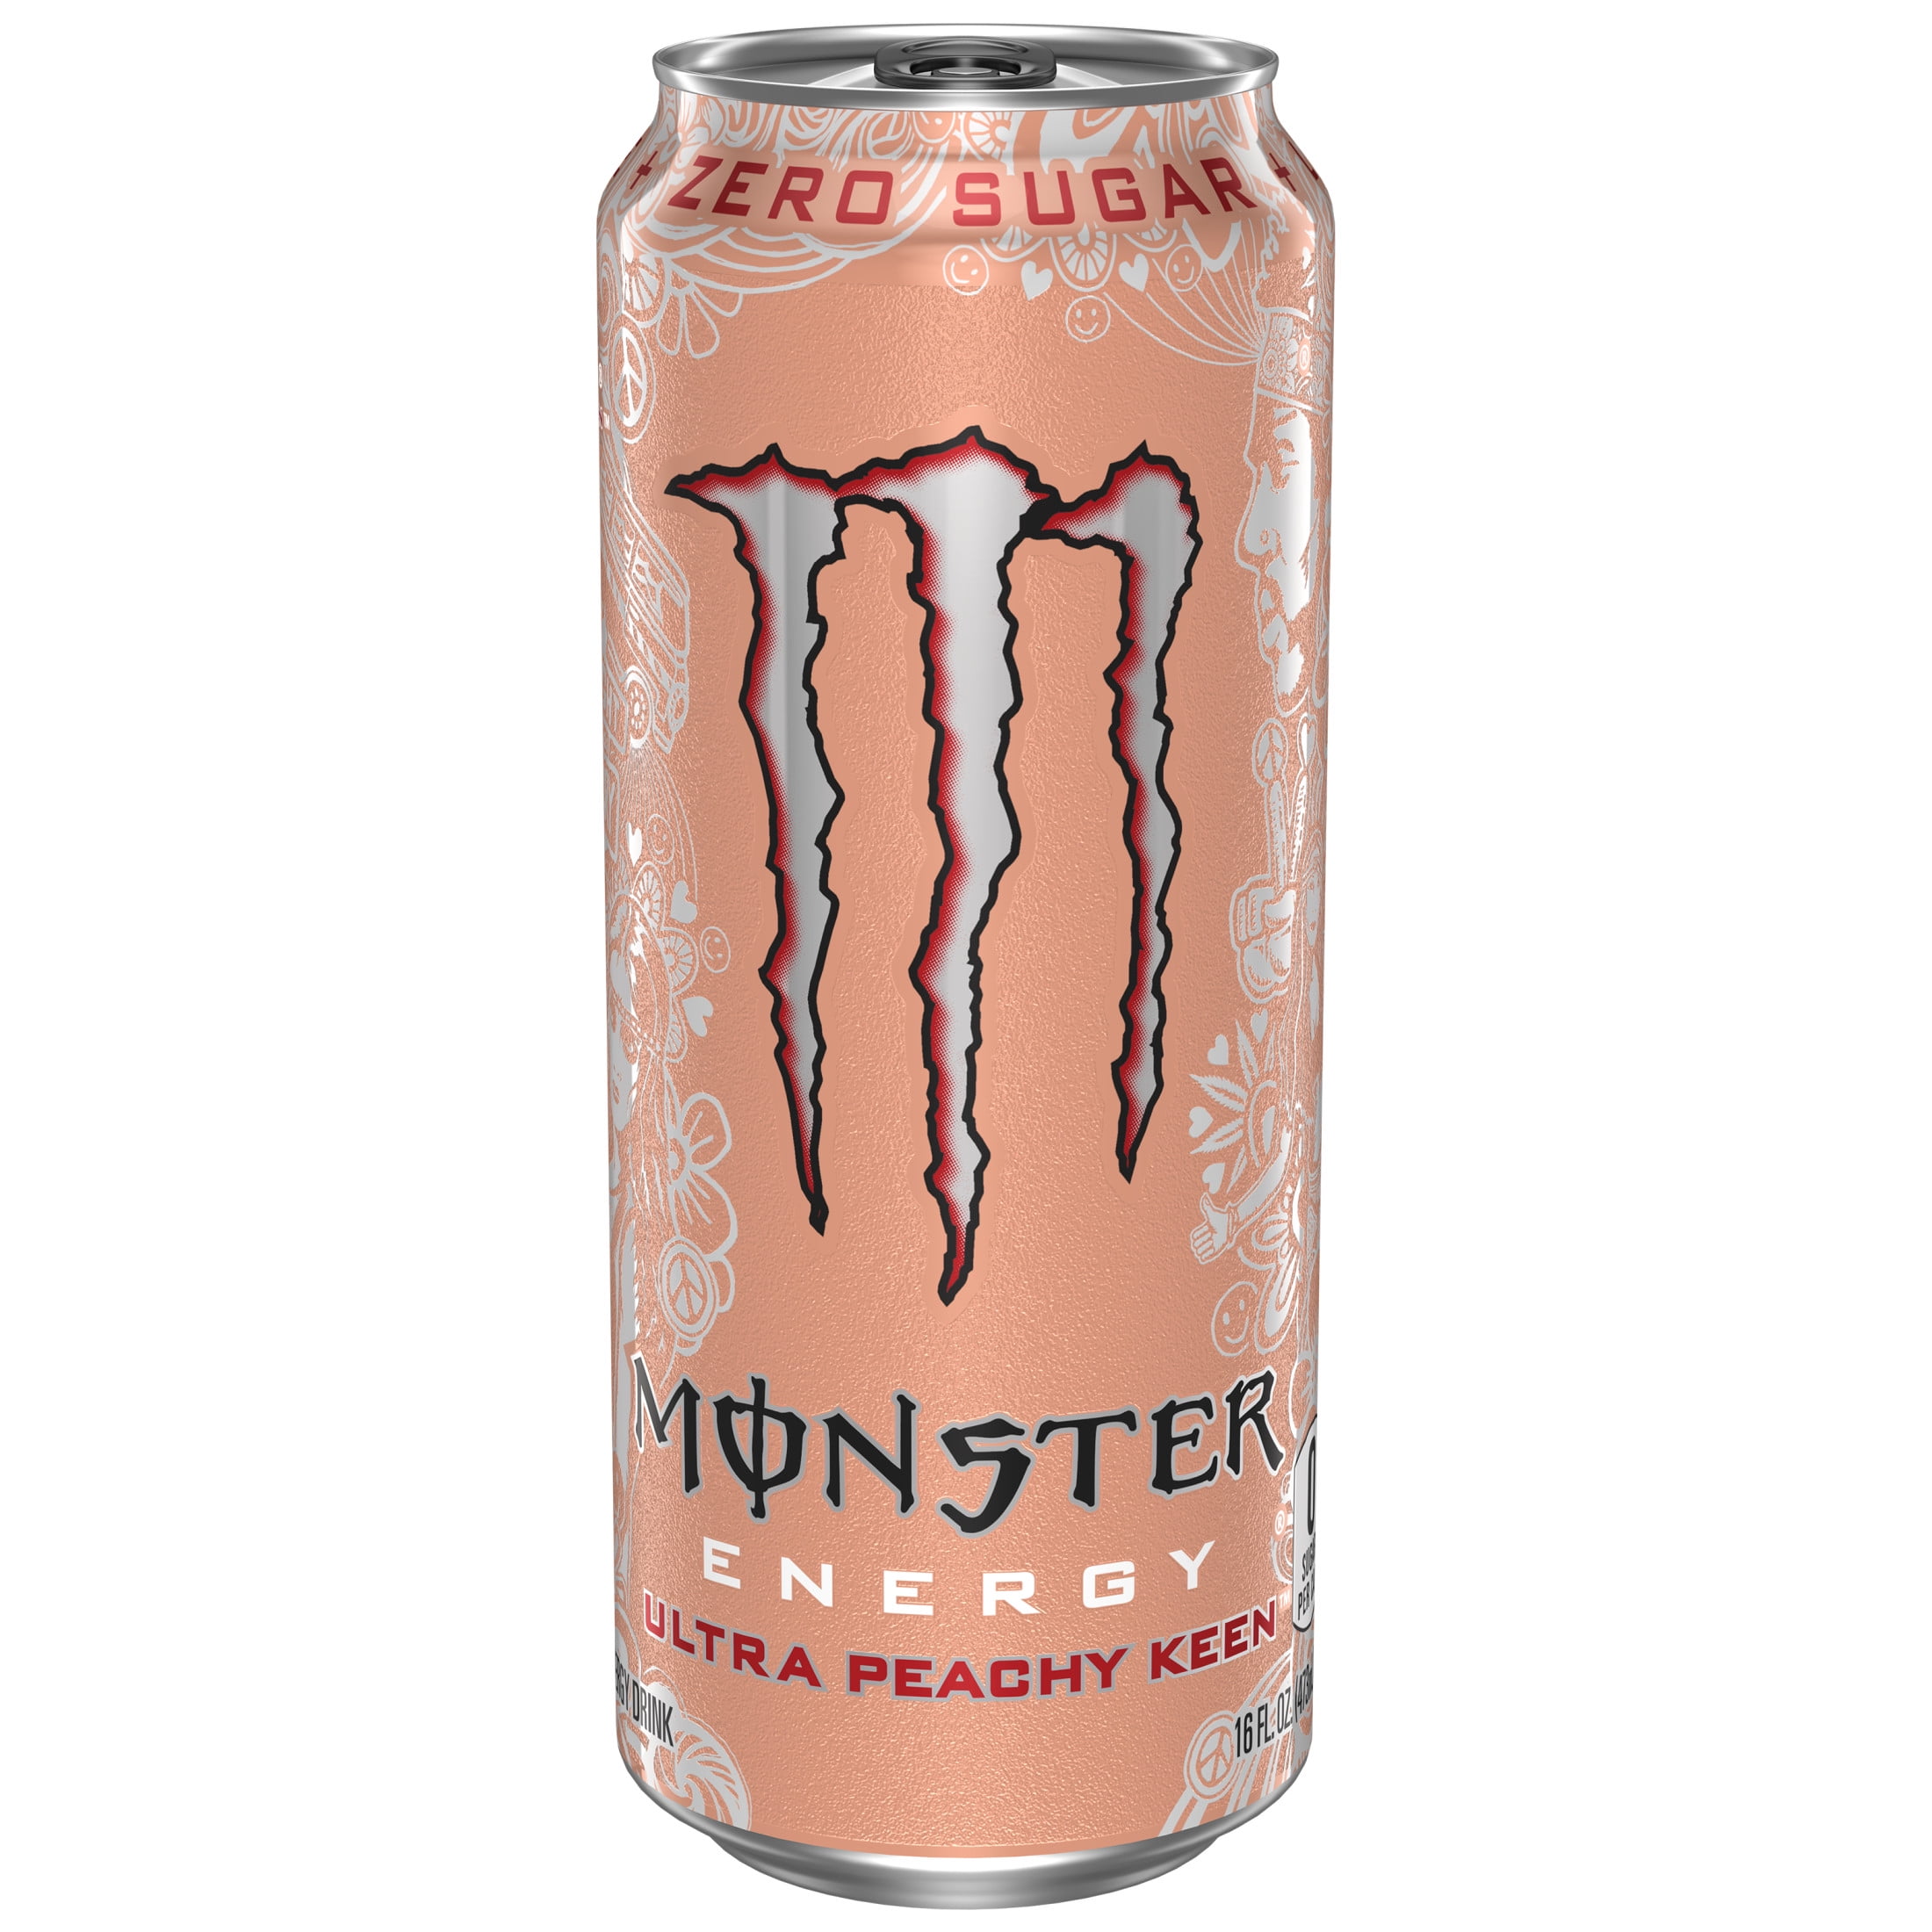 Buy Monster Energy Ultra Peachy Keen Fl Oz Online At Lowest Price